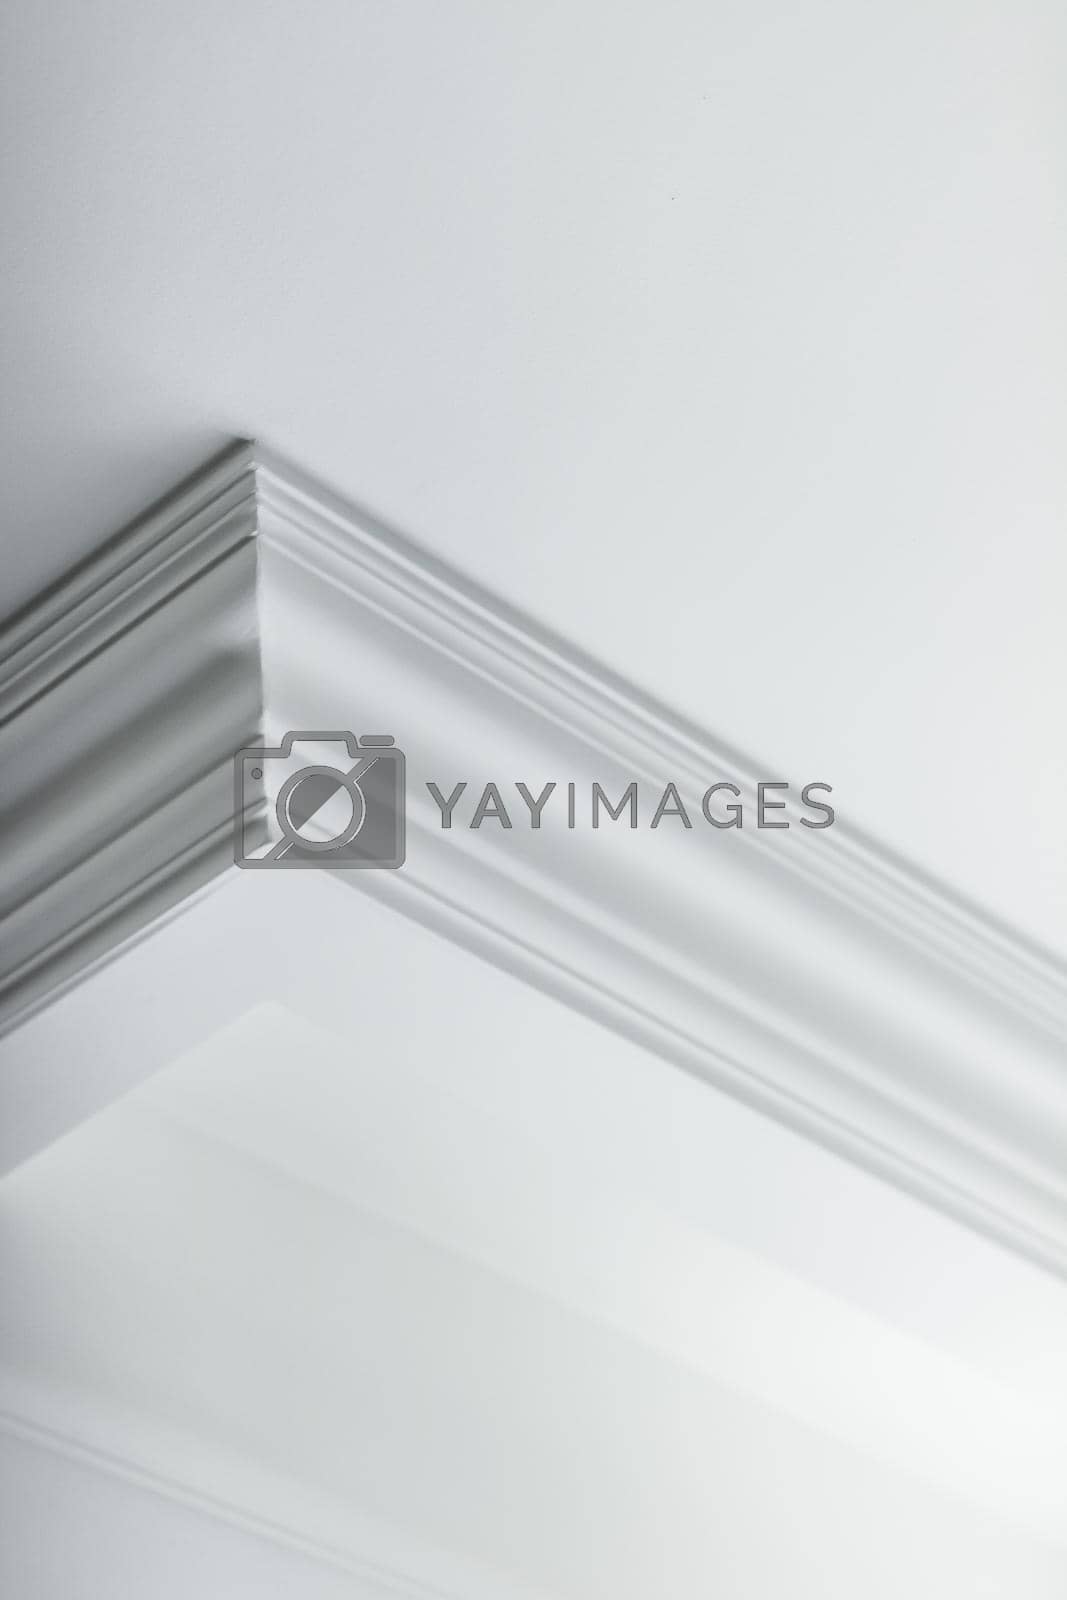 Royalty free image of Molding on ceiling detail, interior design and architectural abstract background by Anneleven